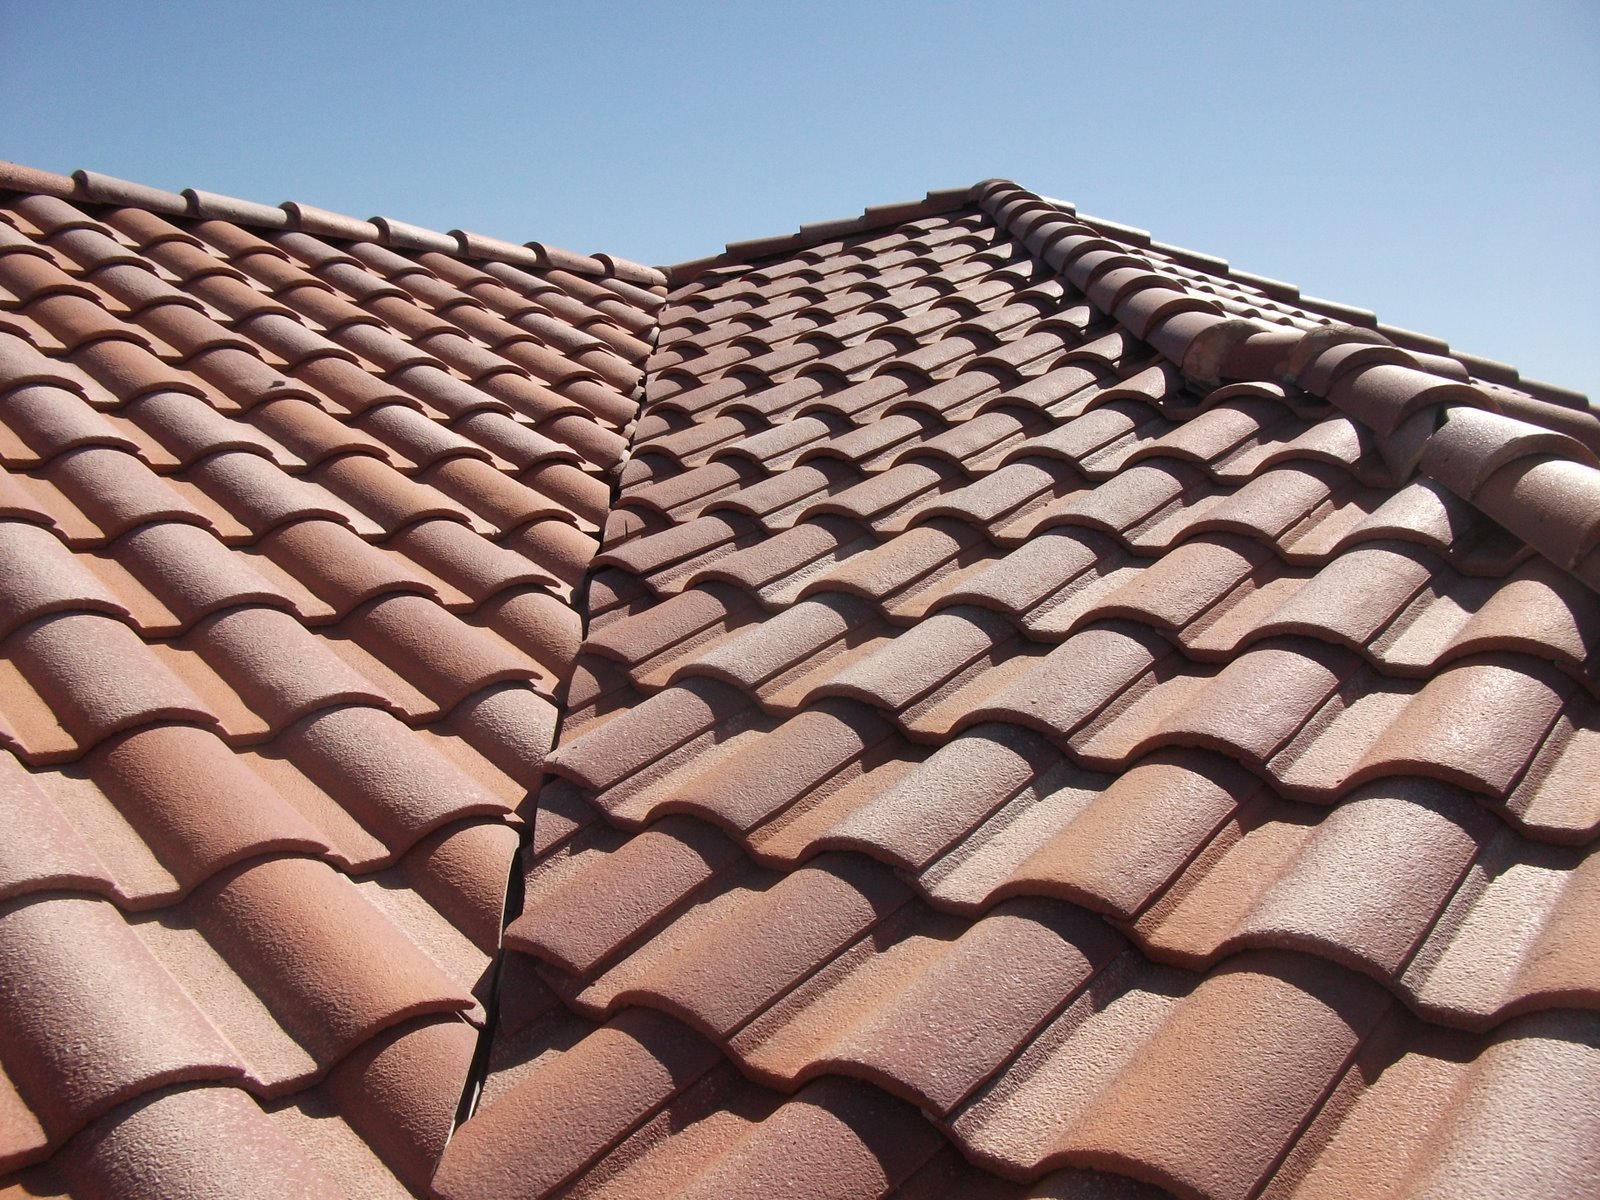 Insurance Claims Solutions: Tile roof, being replaced as repairs can't